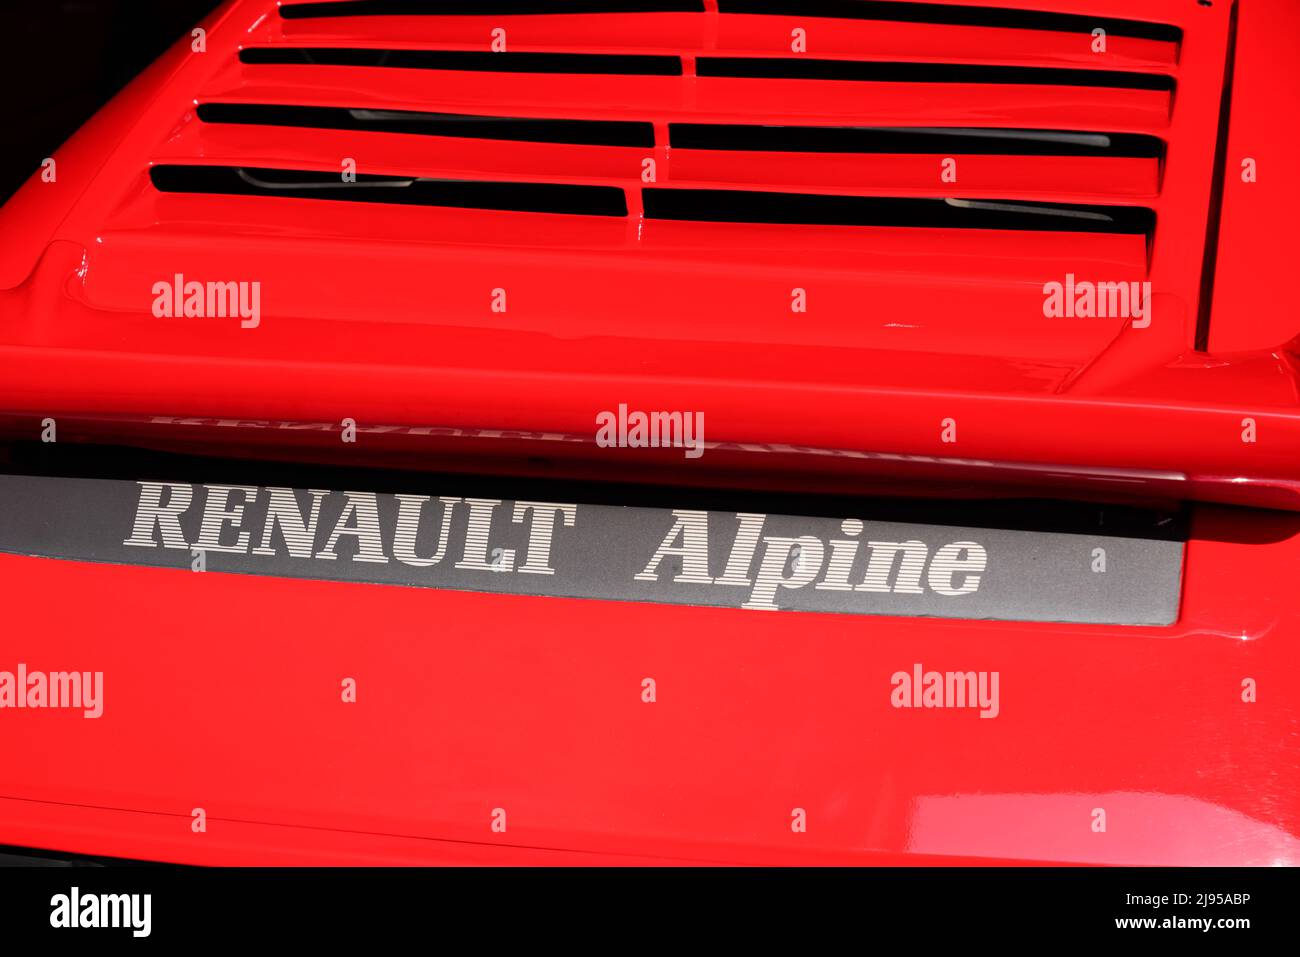 Bordeaux , Aquitaine  france - 05 08 2022 : alpine berline A310 by renault car logo brand and text sign french racing car Stock Photo